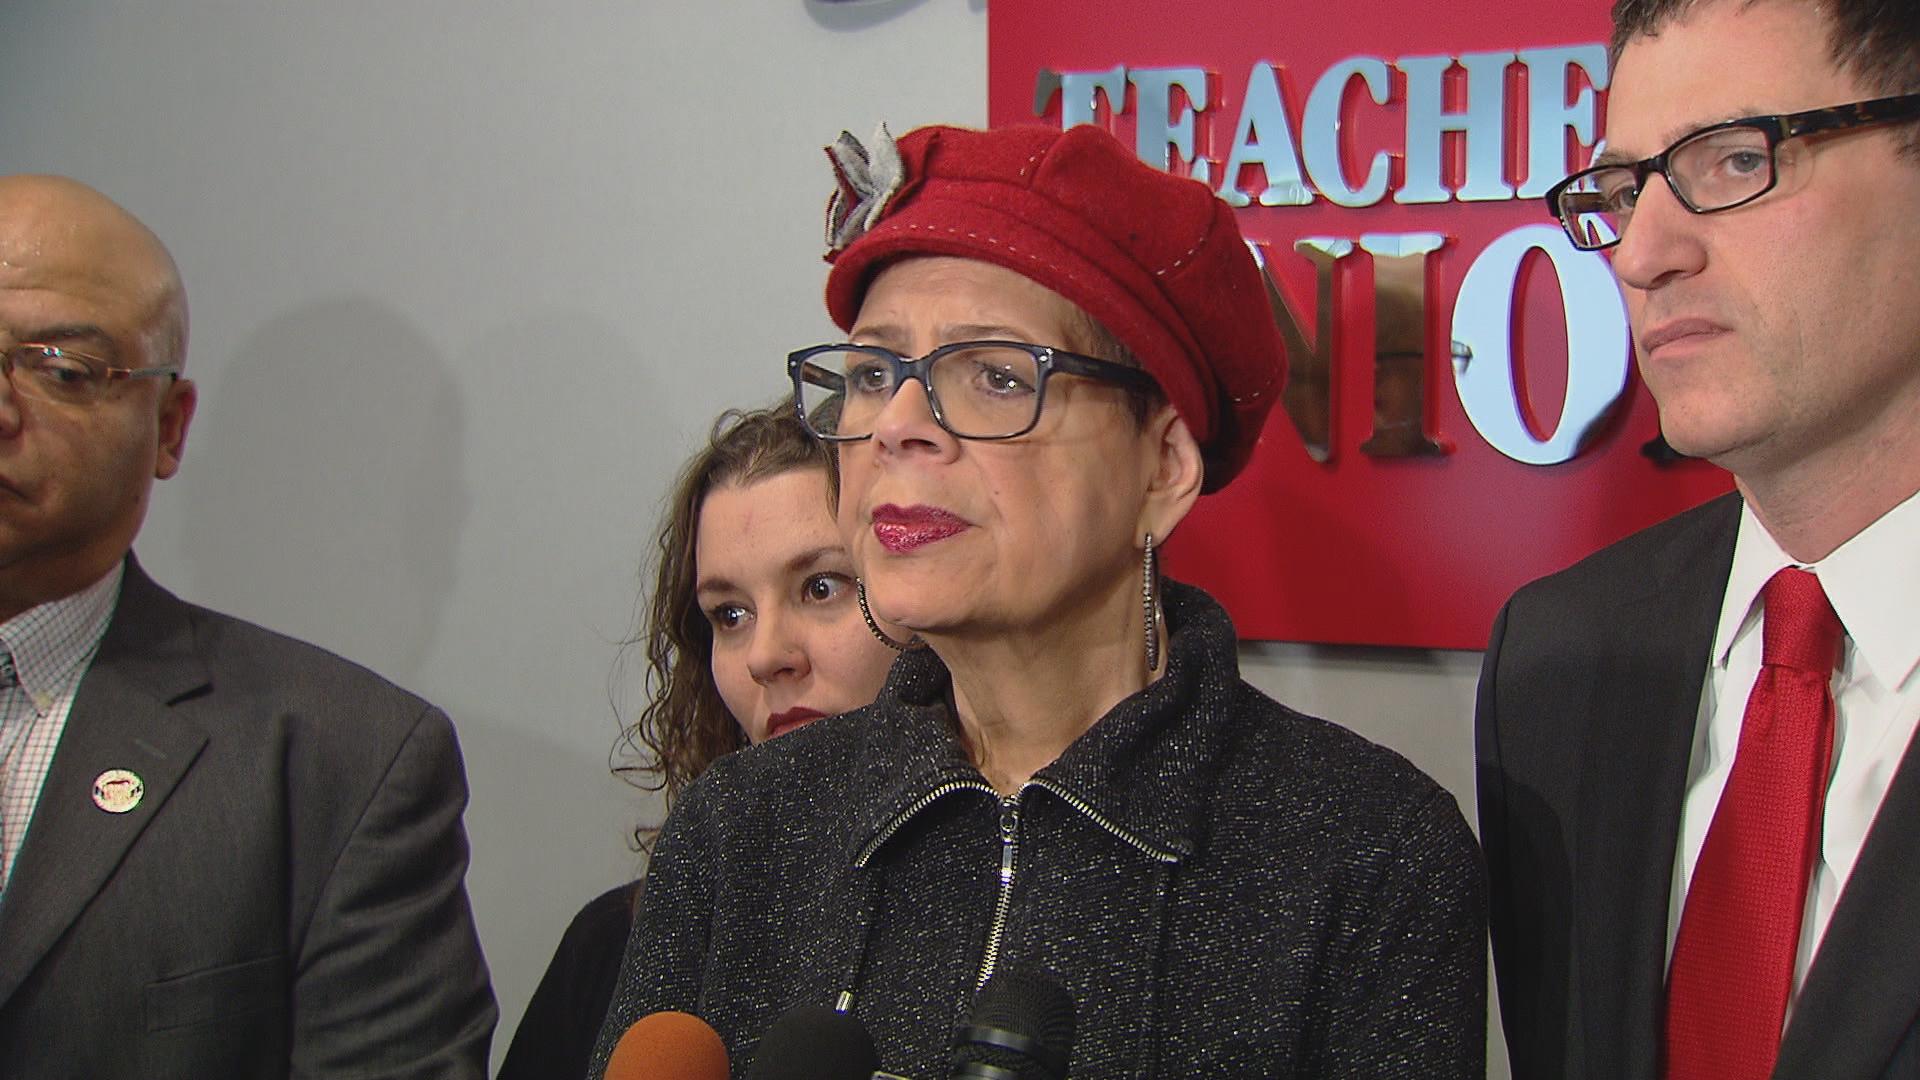 Karen Lewis on Jan. 20 responds to a proposal by Gov. Bruce Rauner and Republican leaders for a state takeover of CPS.